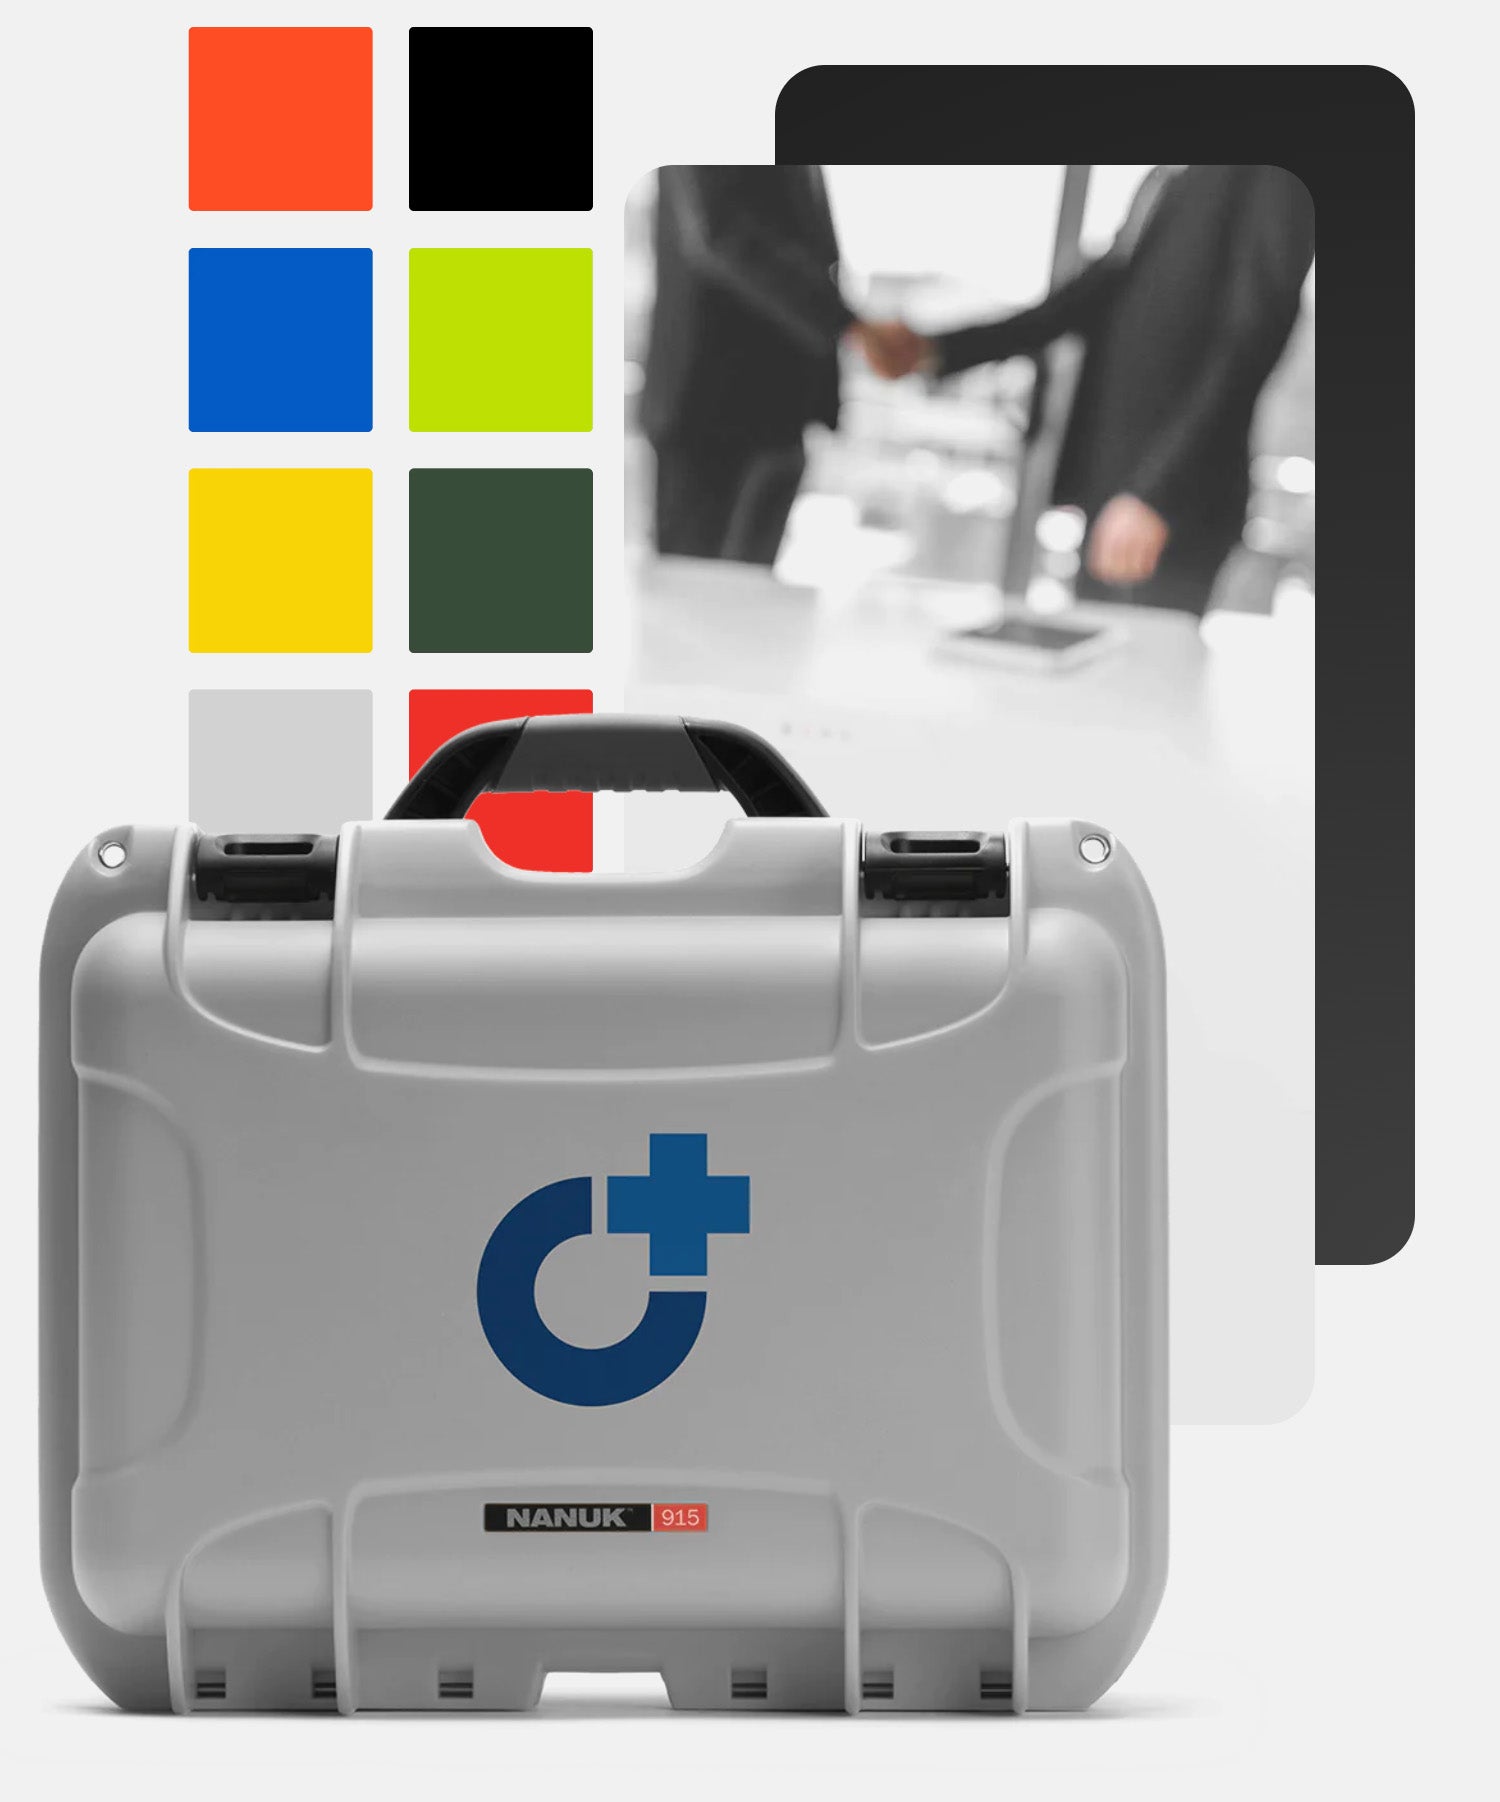 Serious protection doesn’t have to be boring. Our smart and sleek cases make sure your medical equipment looks as great as it works. So you always make an impression, whether you’re in front of hospital administrators, purchasing personnel, doctors, nurses, patients or other decision makers.